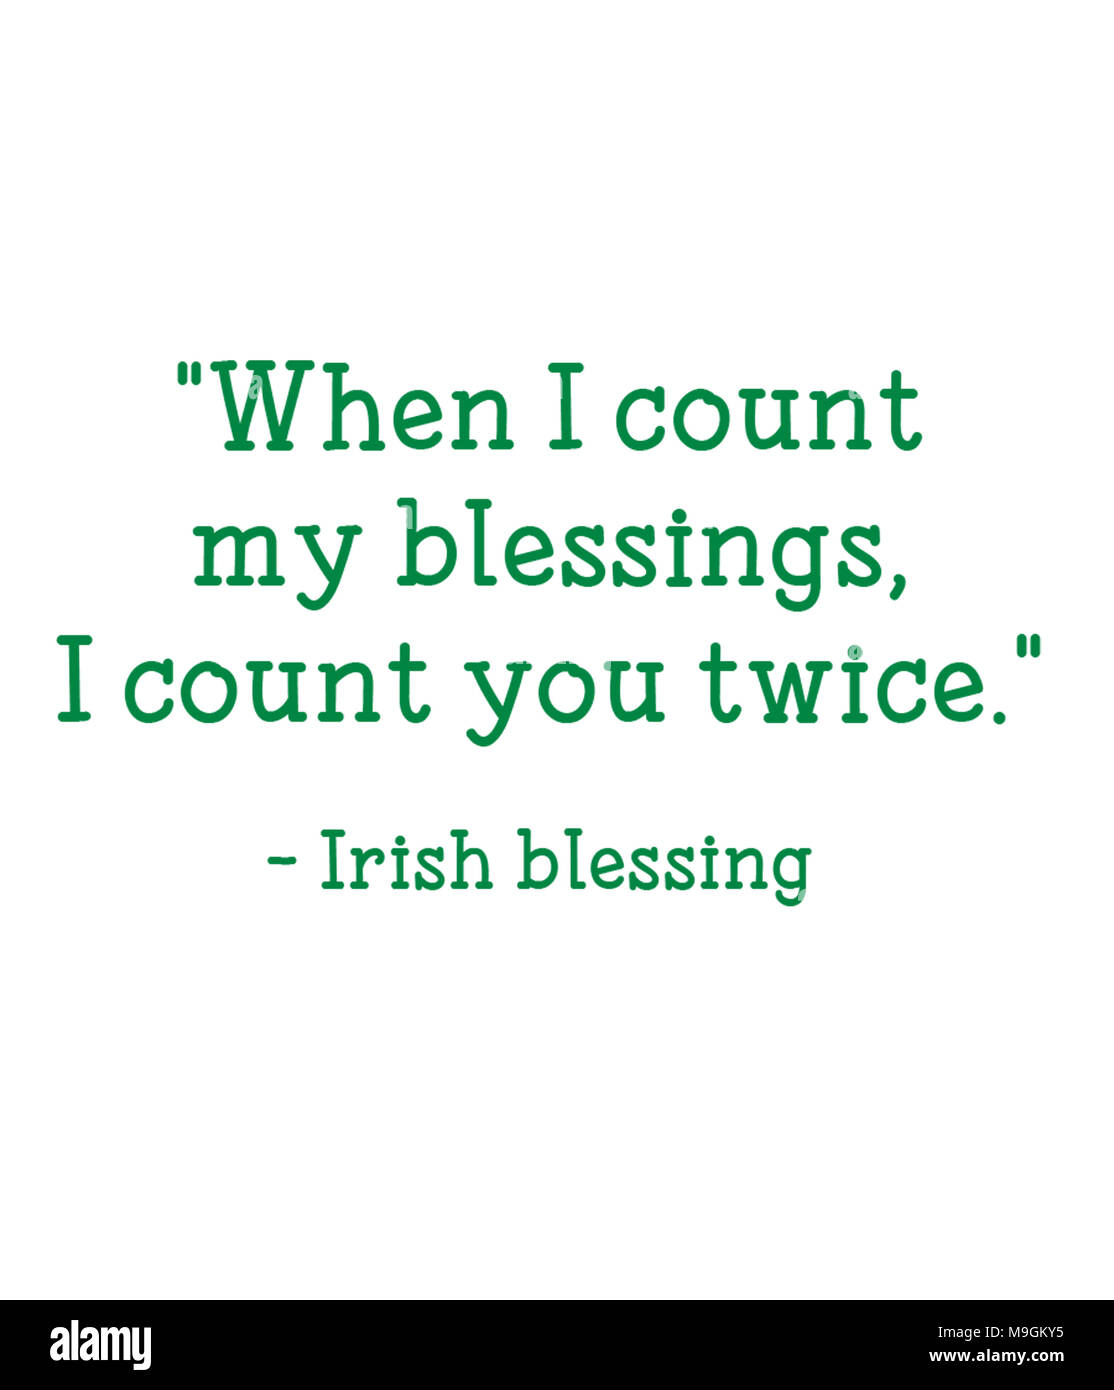 Time to Count Our Blessings - Monday Inspiration (2-Minute Read)